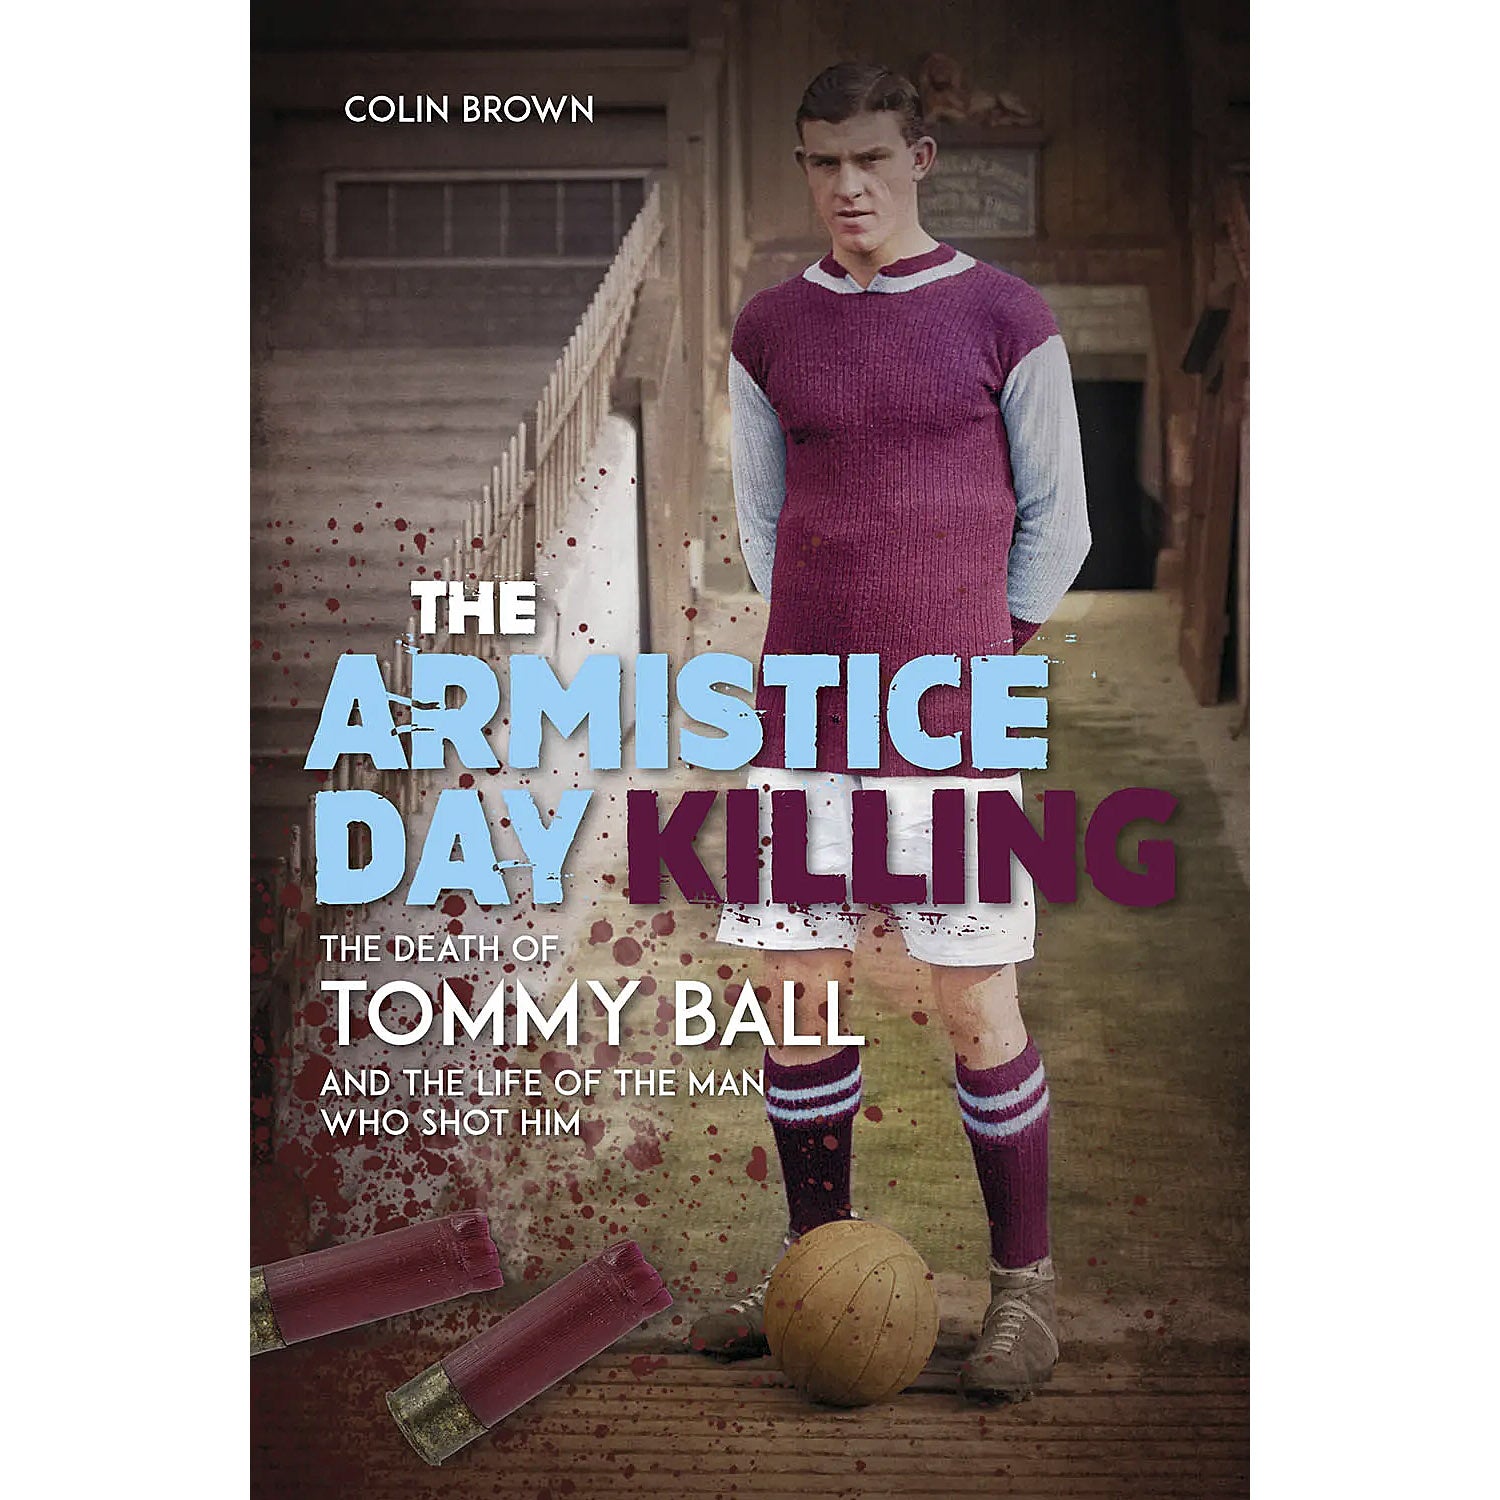 The Armistice Day Killing – The Death of Tommy Ball and the Life of the Man Who Shot Him